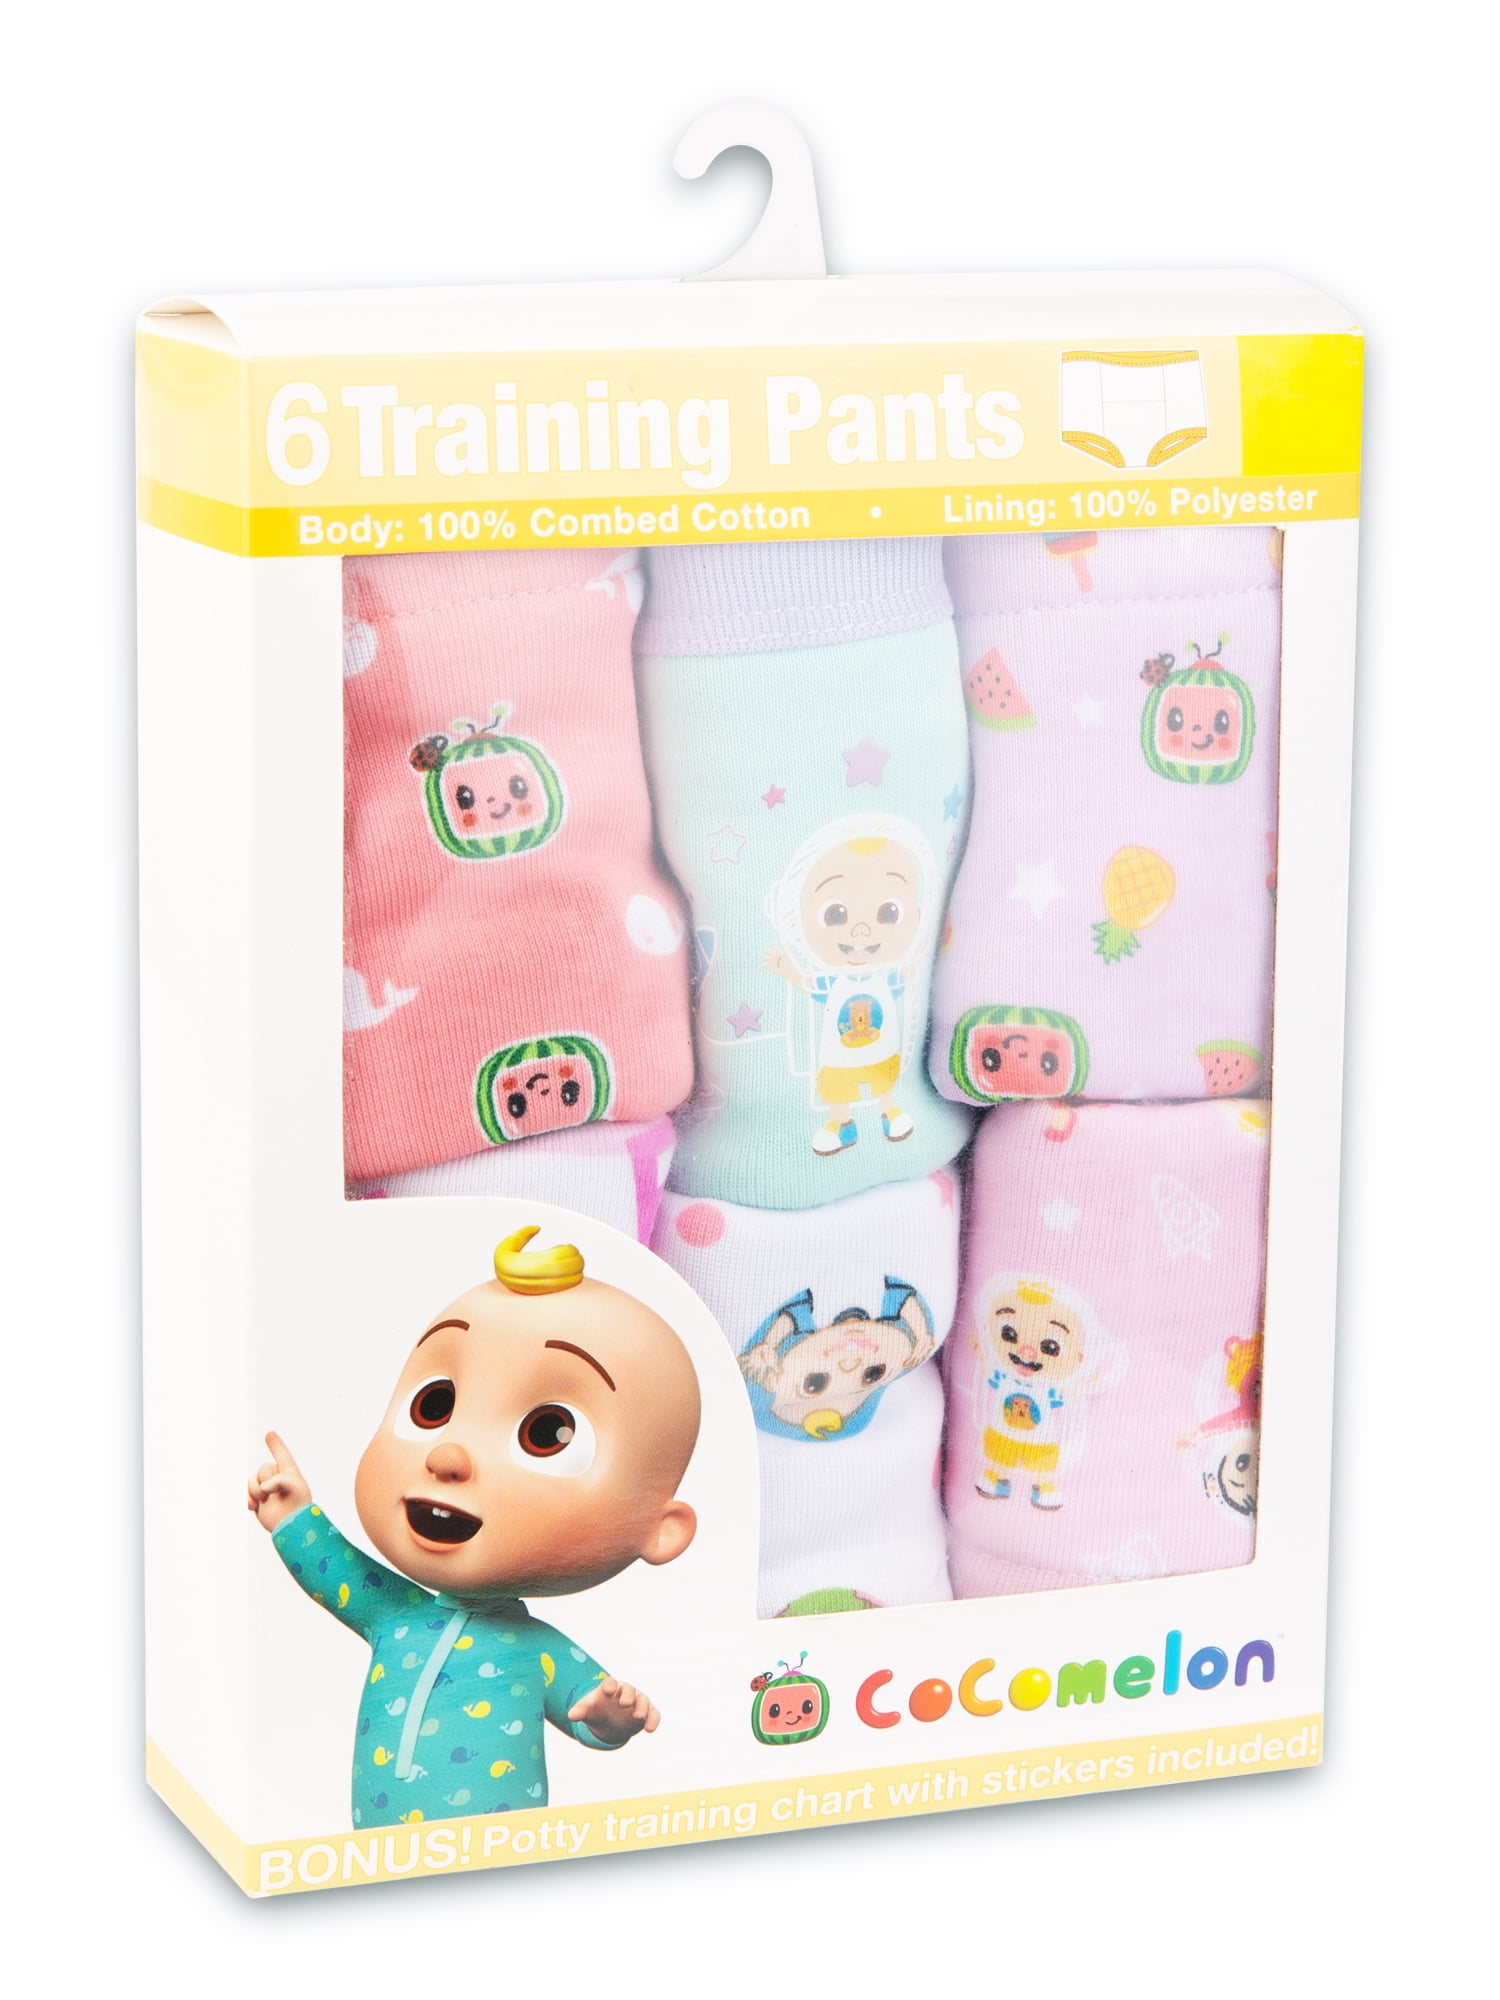 Cocomelon Toddler Girls' Training Pants, 6 - Pack, Sizes 4T 